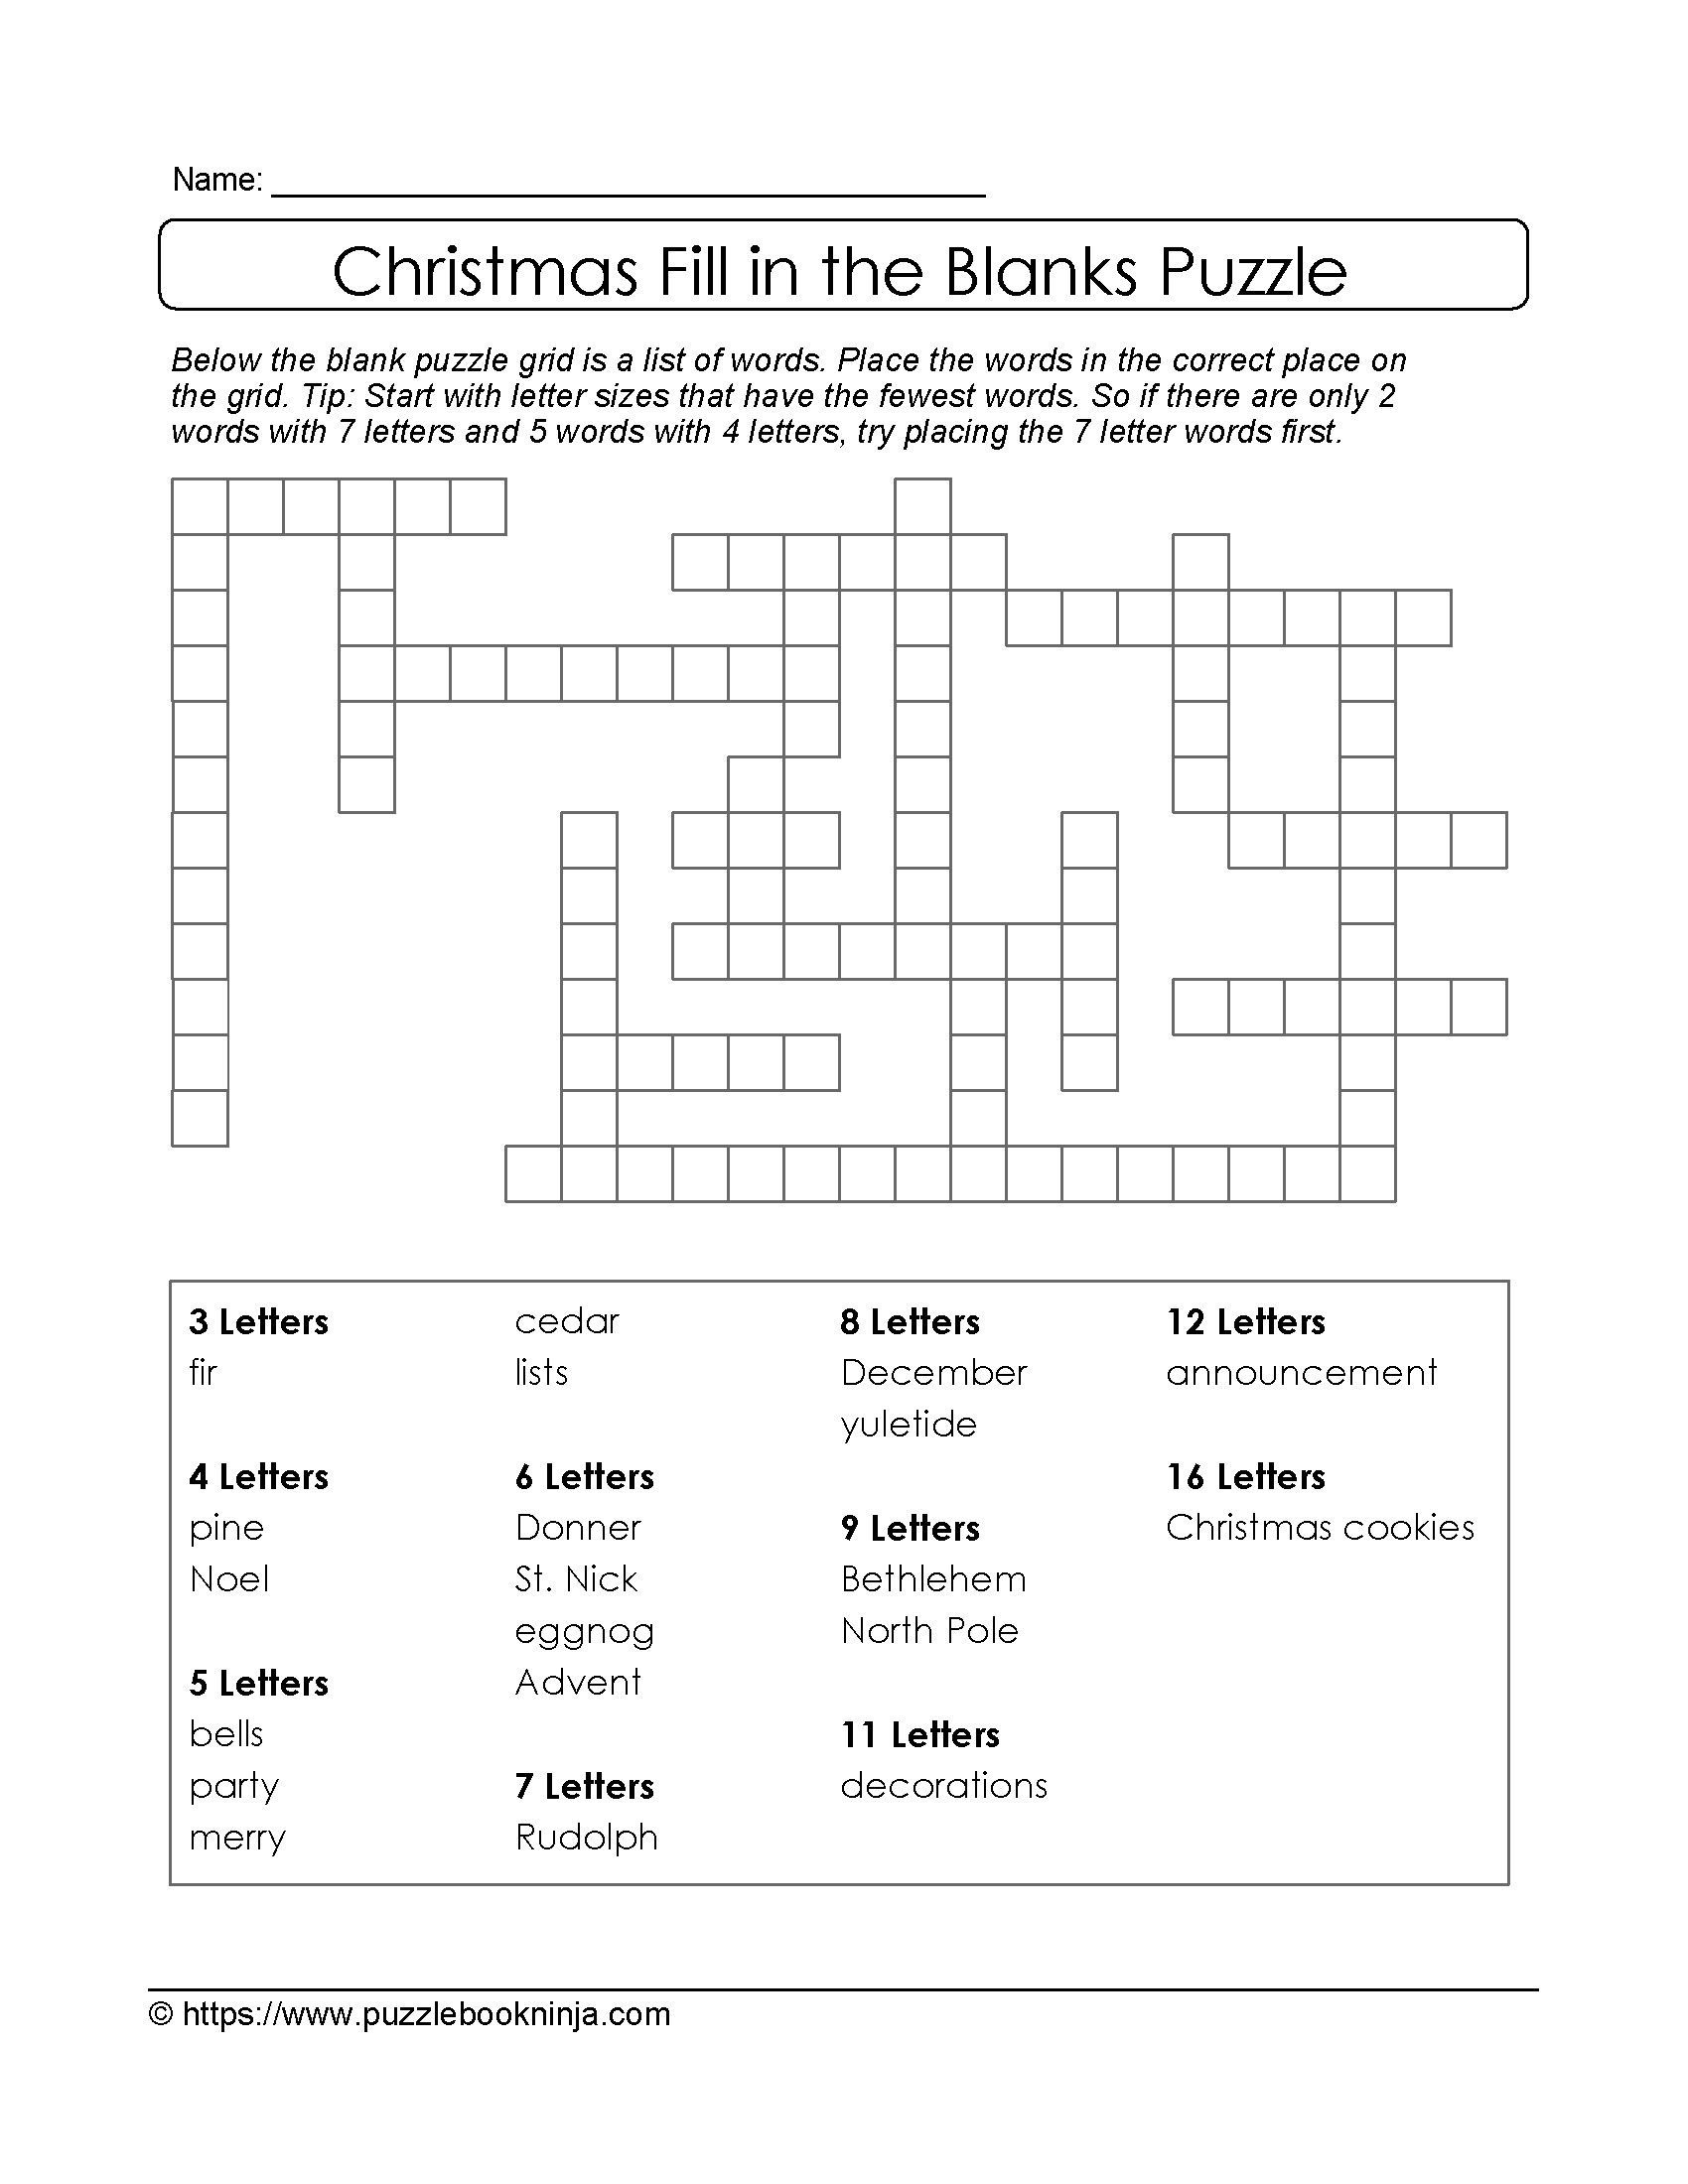 printable-logic-puzzles-for-10-year-olds-printable-logic-puzzles